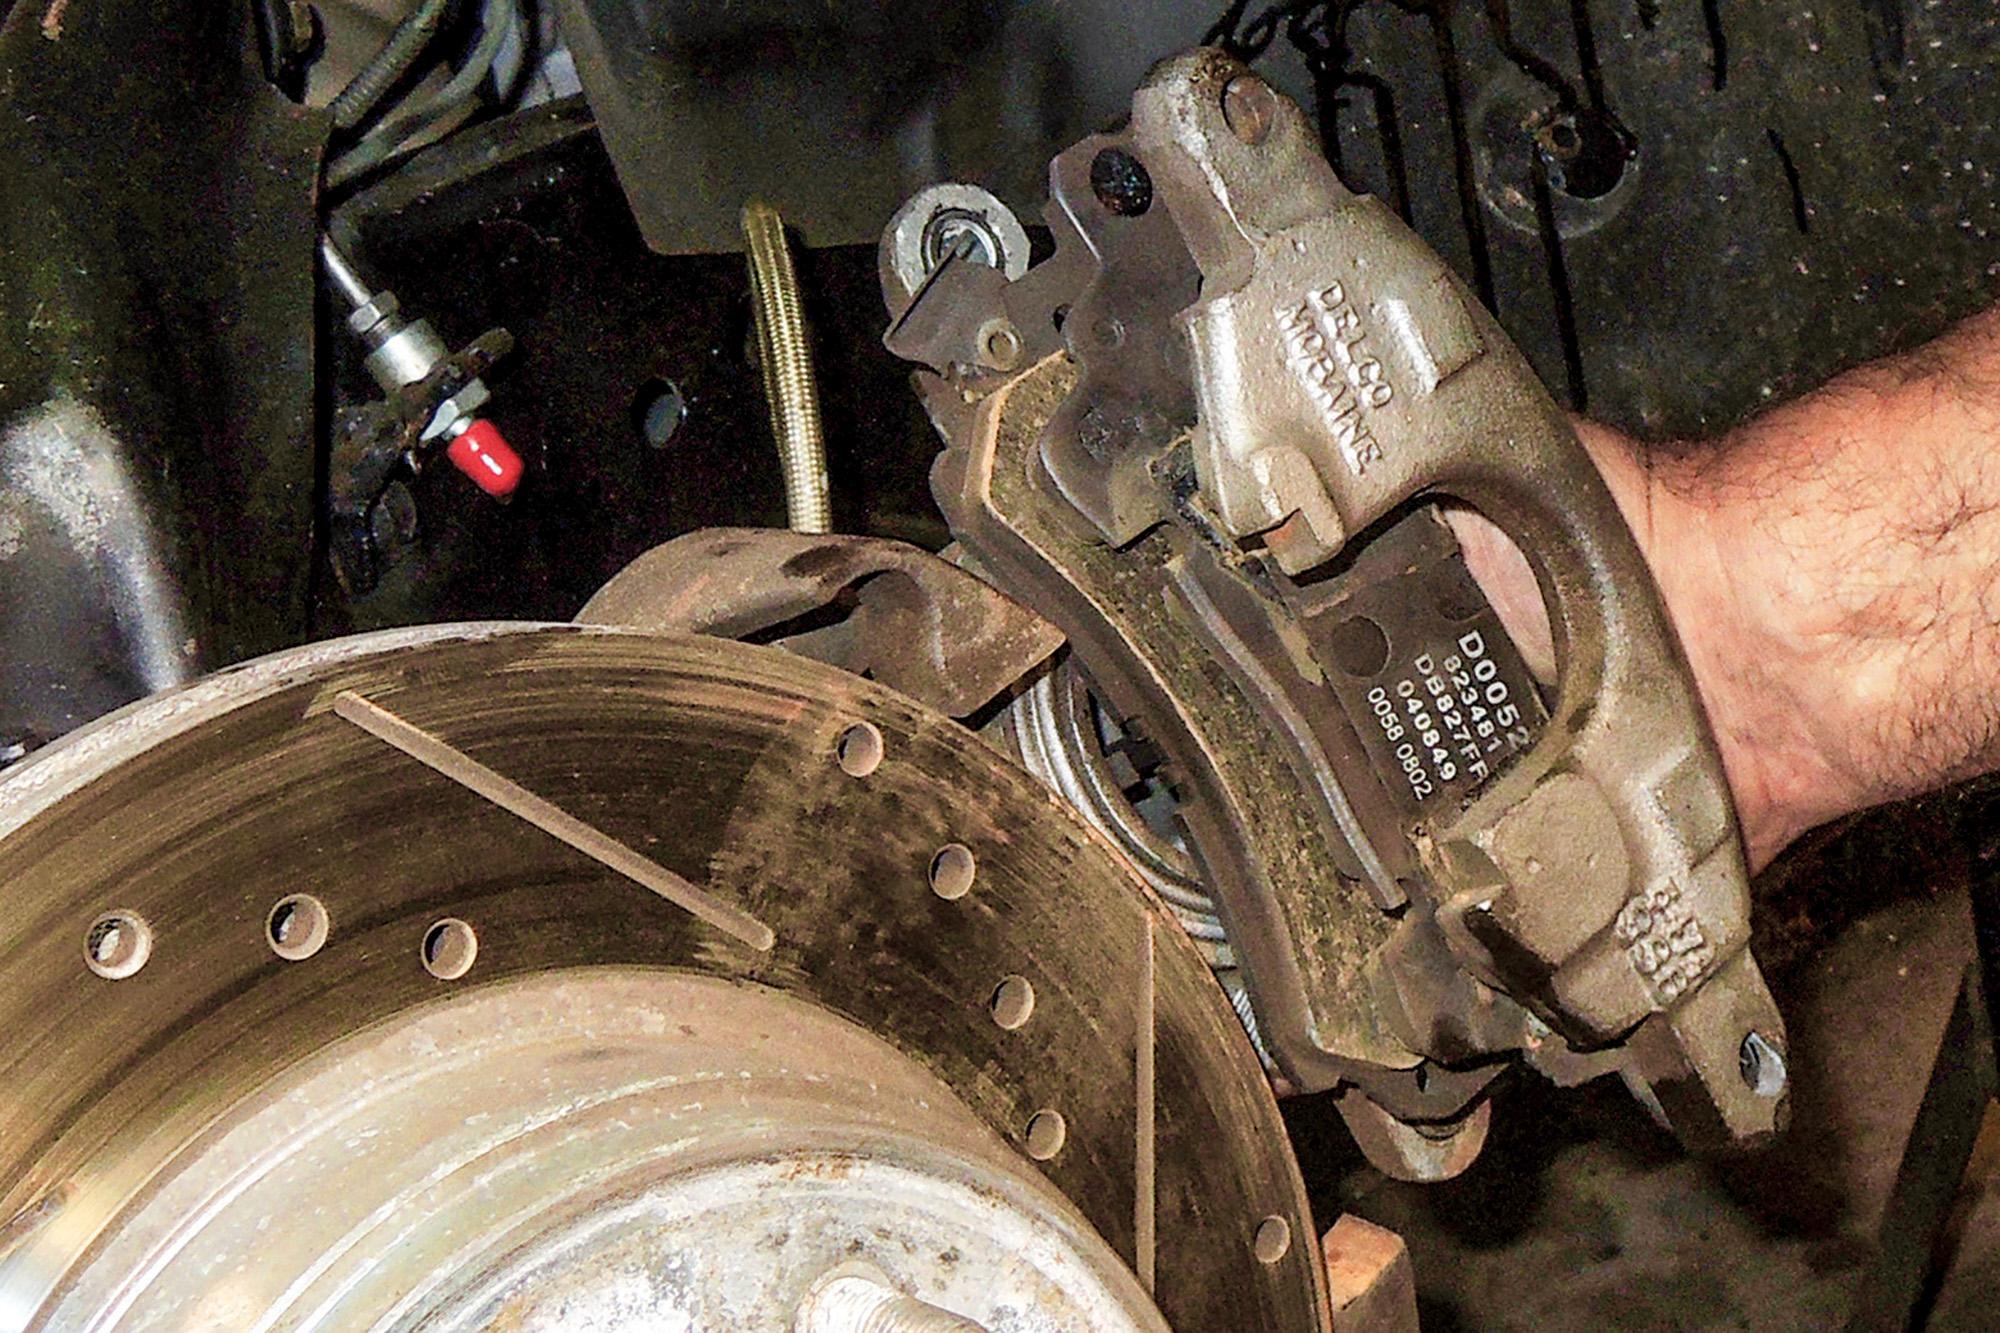 In two hours we had better brakes on our Chevelle with an aluminum caliper swap